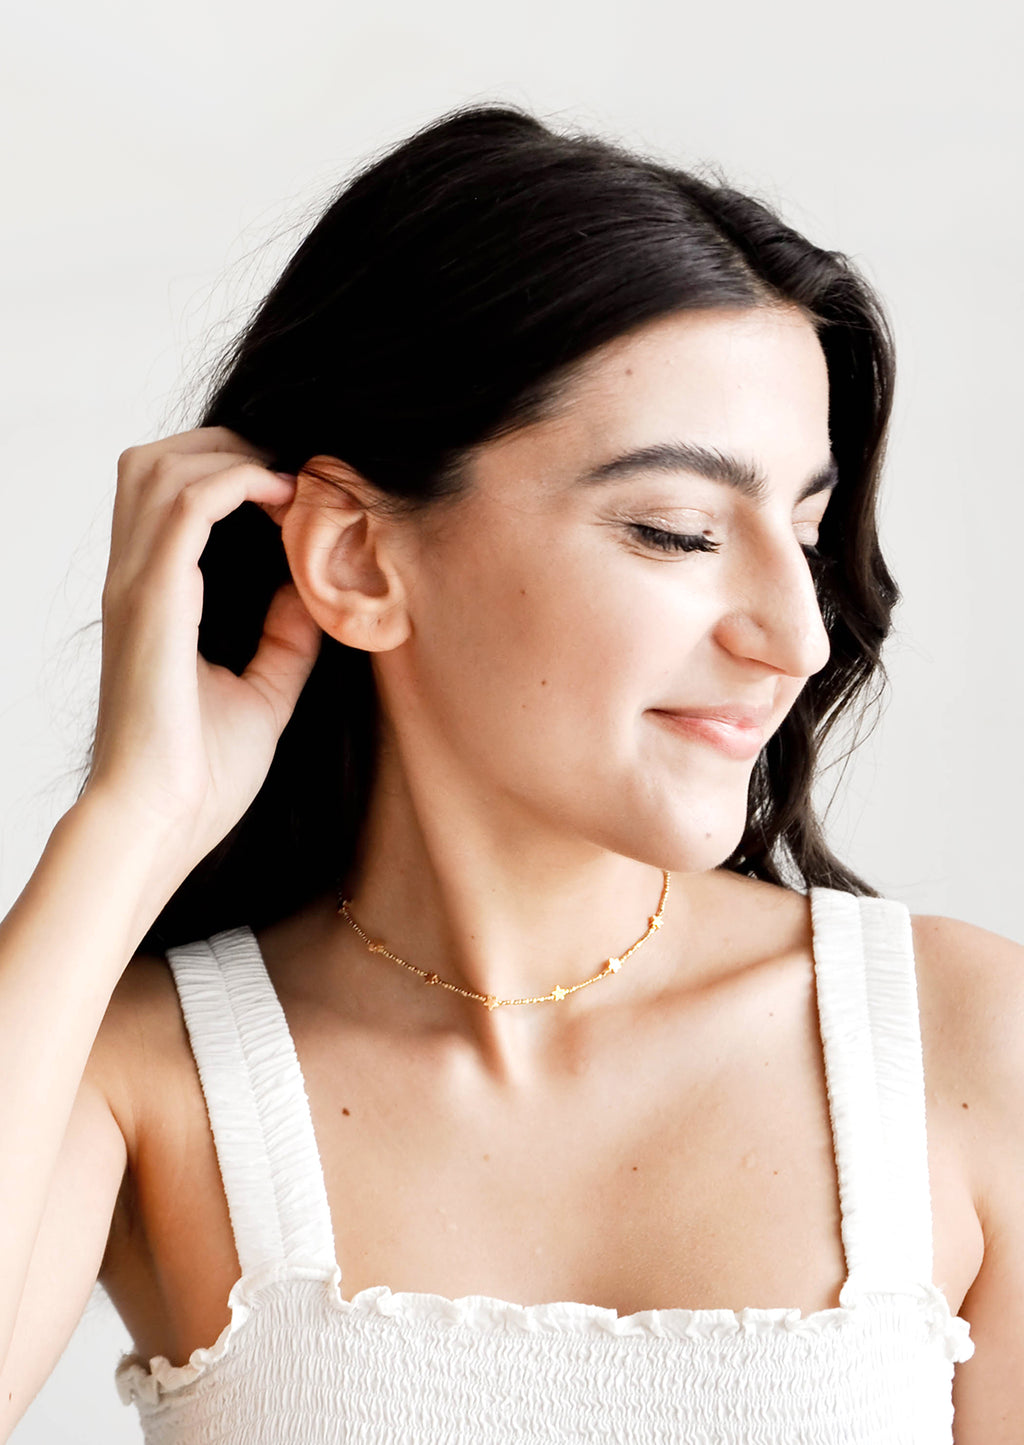 3: Model shot of woman wearing necklace and white top.